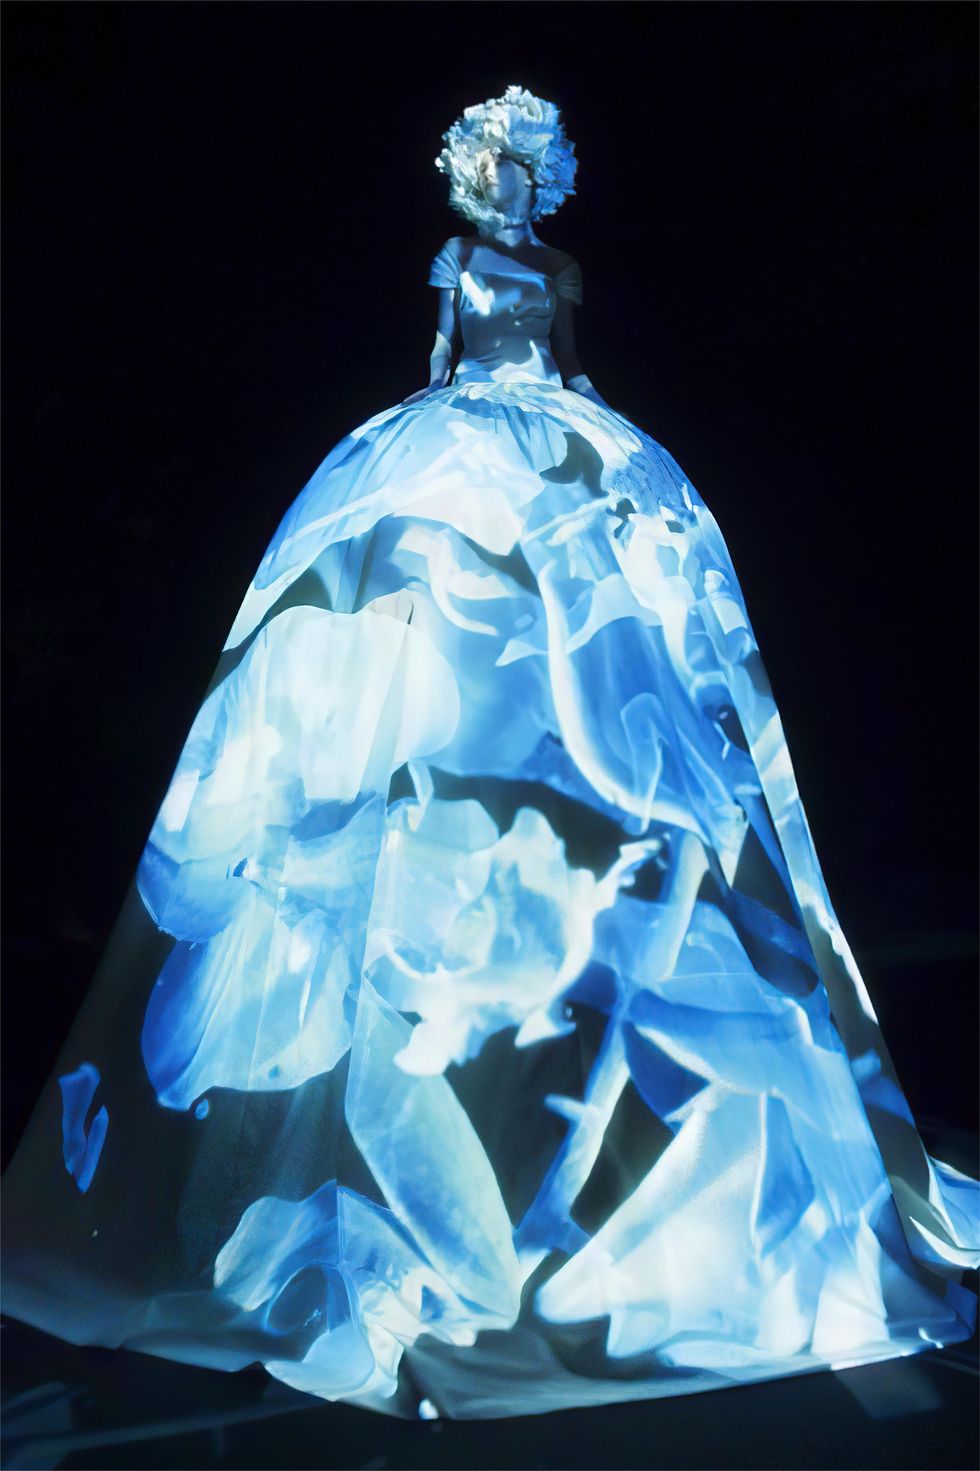 Blue, Cobalt blue, Fashion, Transparent material, Electric blue, Outerwear, Ice, Dress, Fashion accessory, Crystal, 